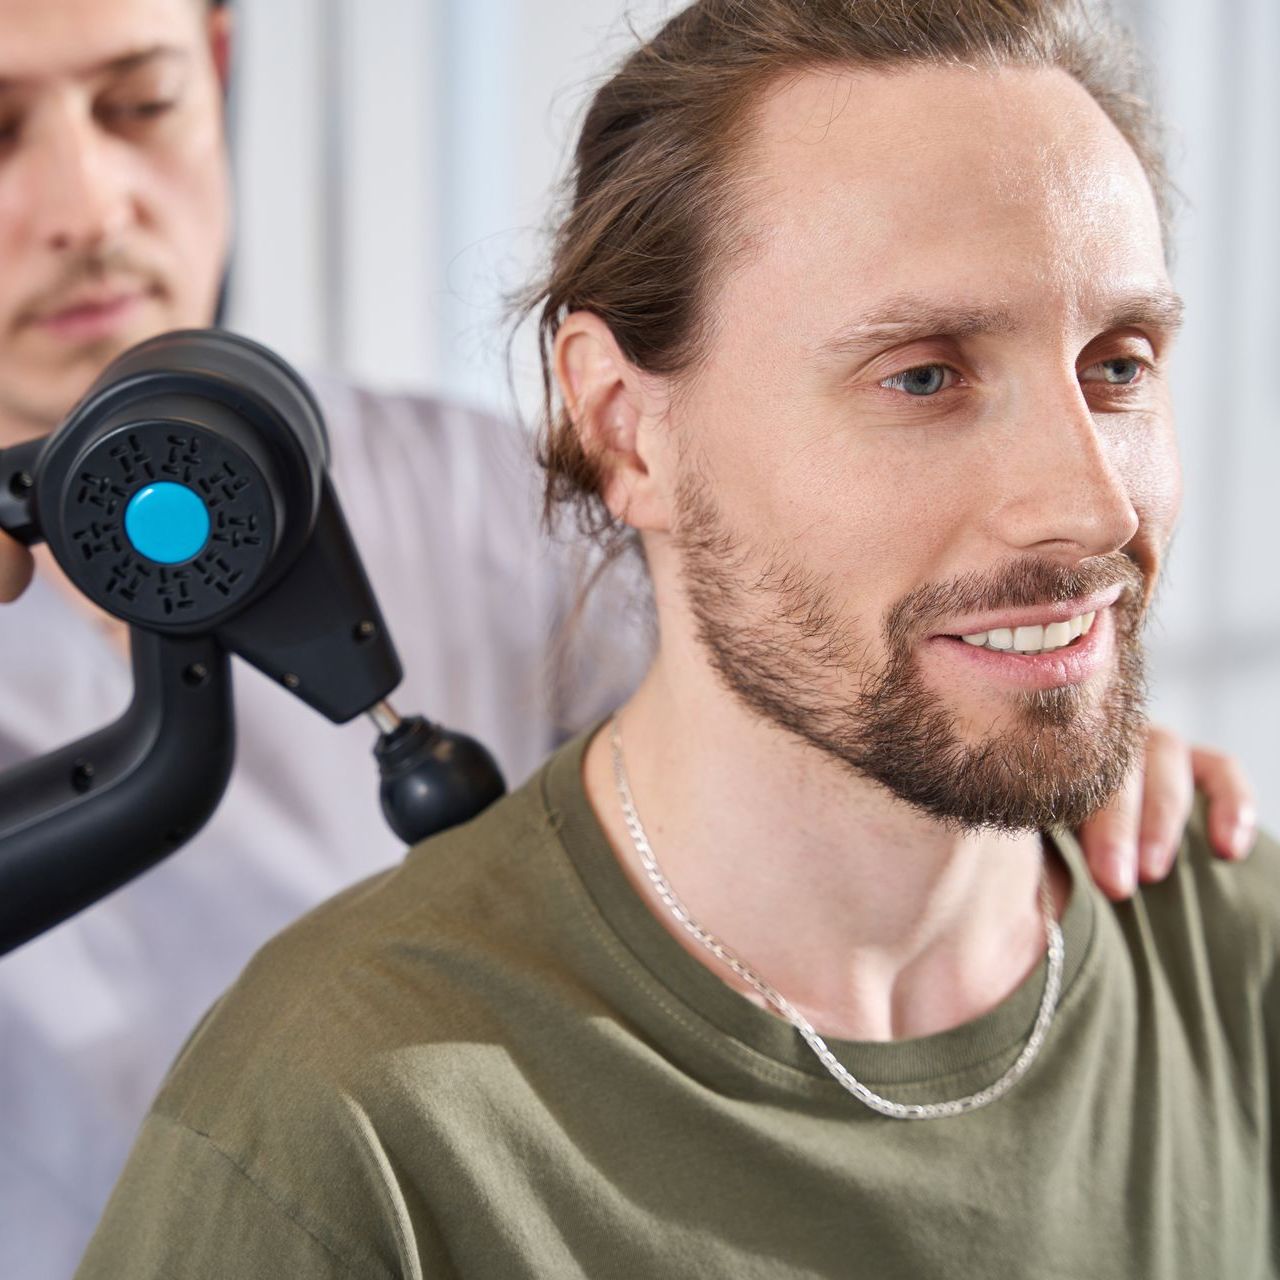 physiotherapy treatment with thera gun